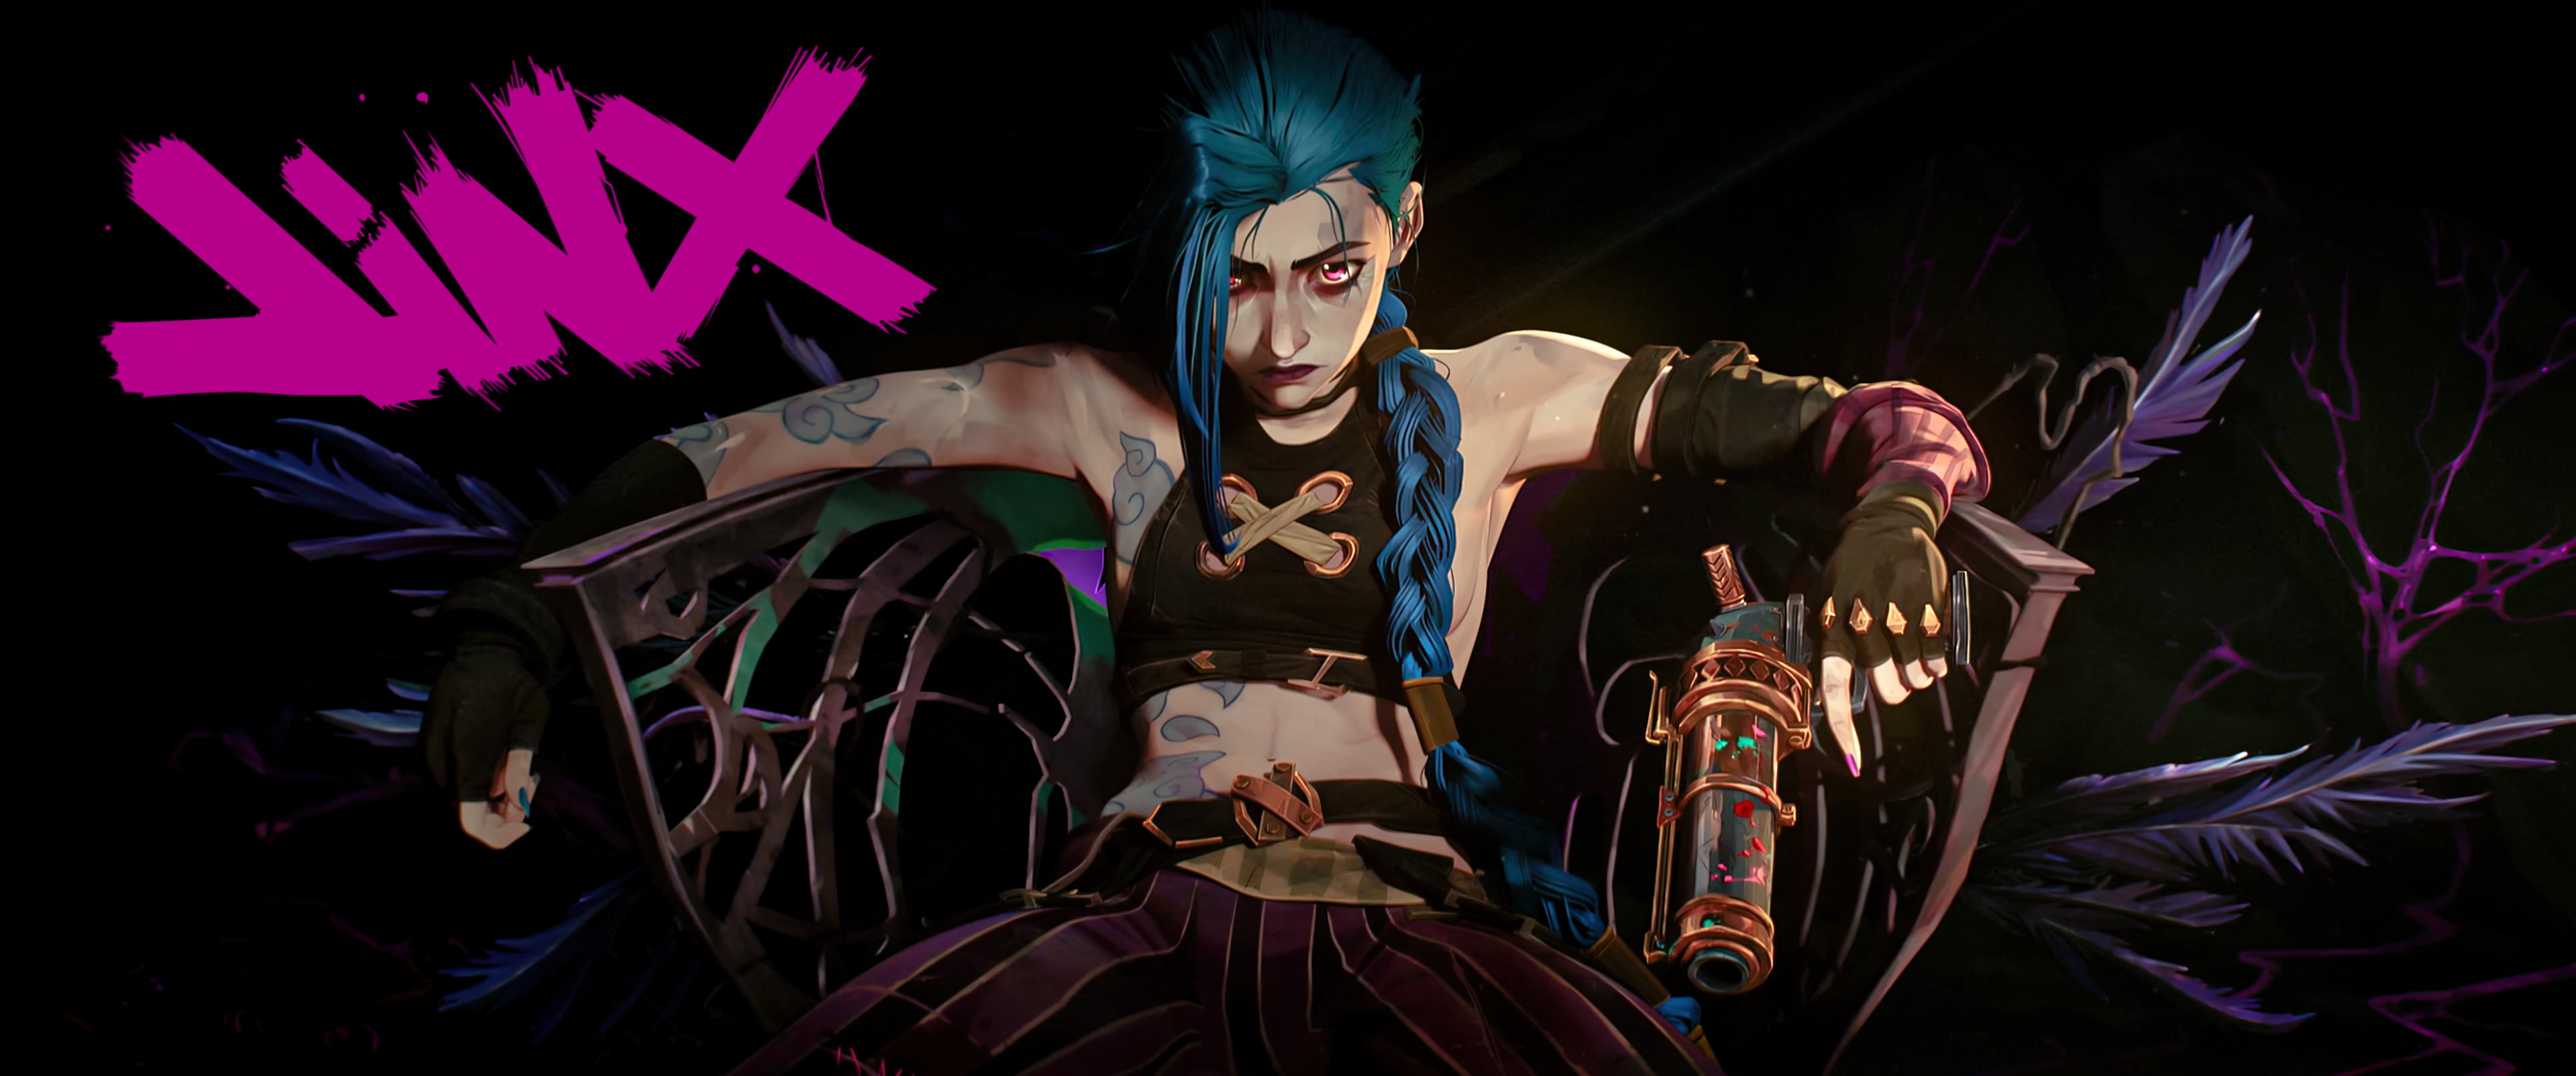 jinx and arcane jinx (league of legends and 1 more) drawn by abs_artz |  Danbooru